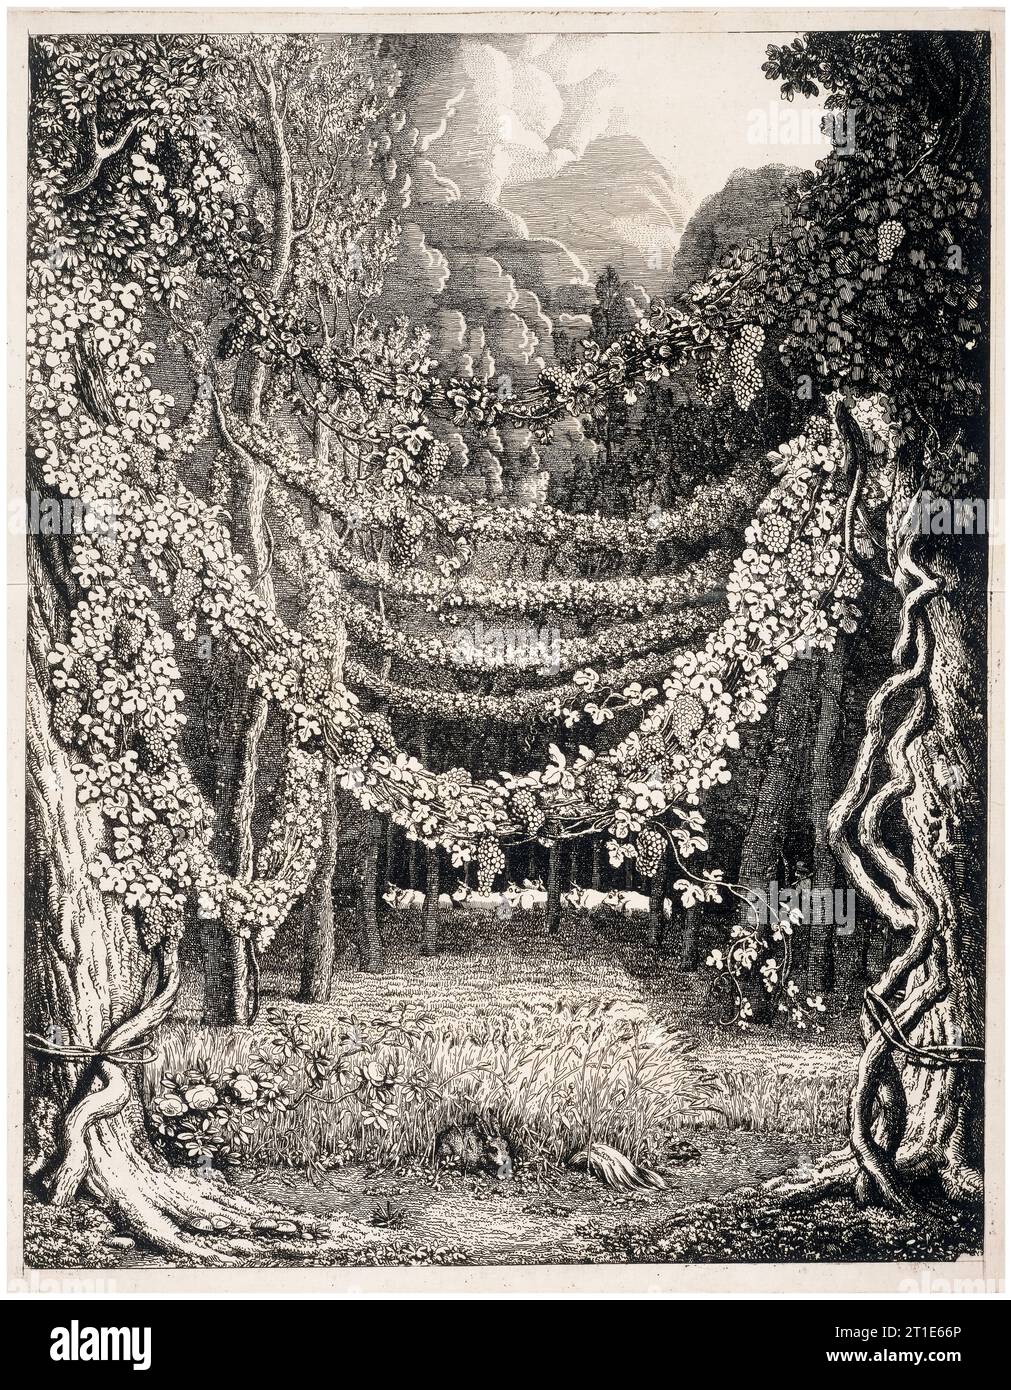 Johann Heinrich Wilhelm Tischbein, Imaginary View of a Vineyard along the Way to the Cave of Polyphemus, print made from an etching, 1796 Stock Photo